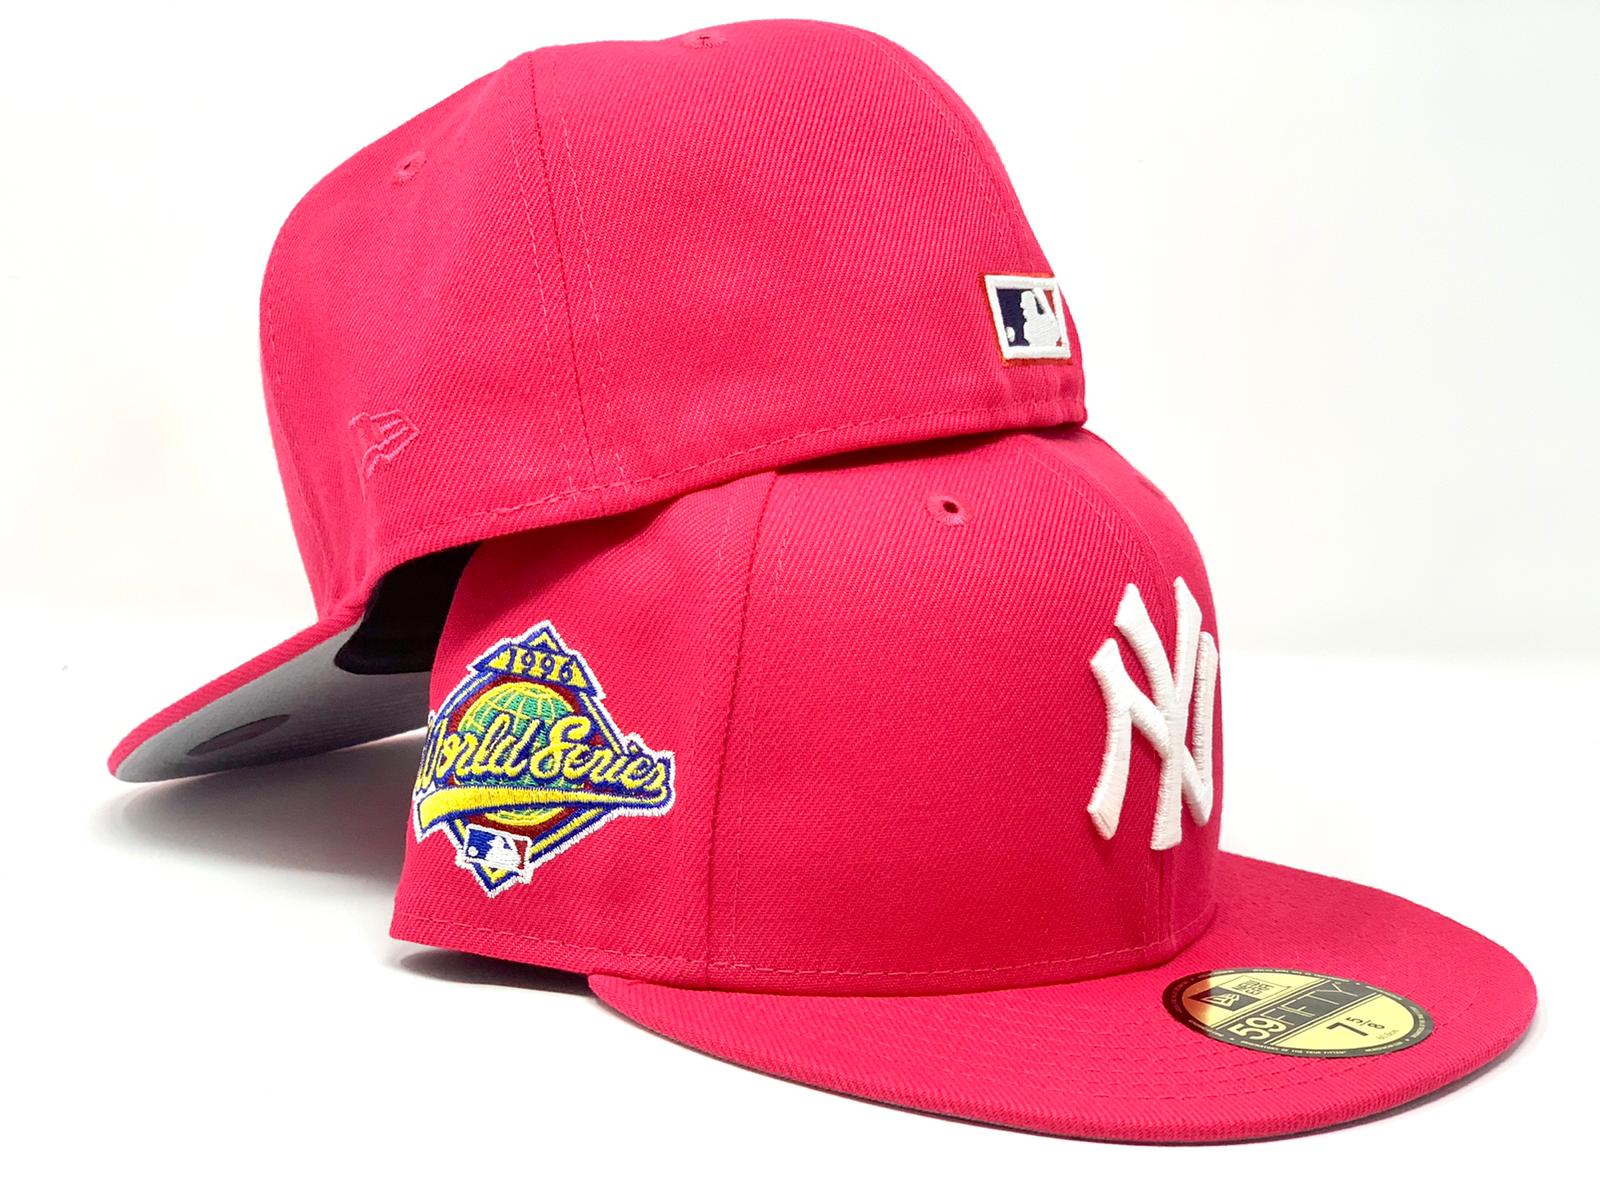 New York Yankees New Era 59FIFTY Fitted Hats (1996 World Series Side Patch Gray Under BRIM) - NY Yankees Grey Underbrim Caps - BX Bombers Fitteds 7 1/